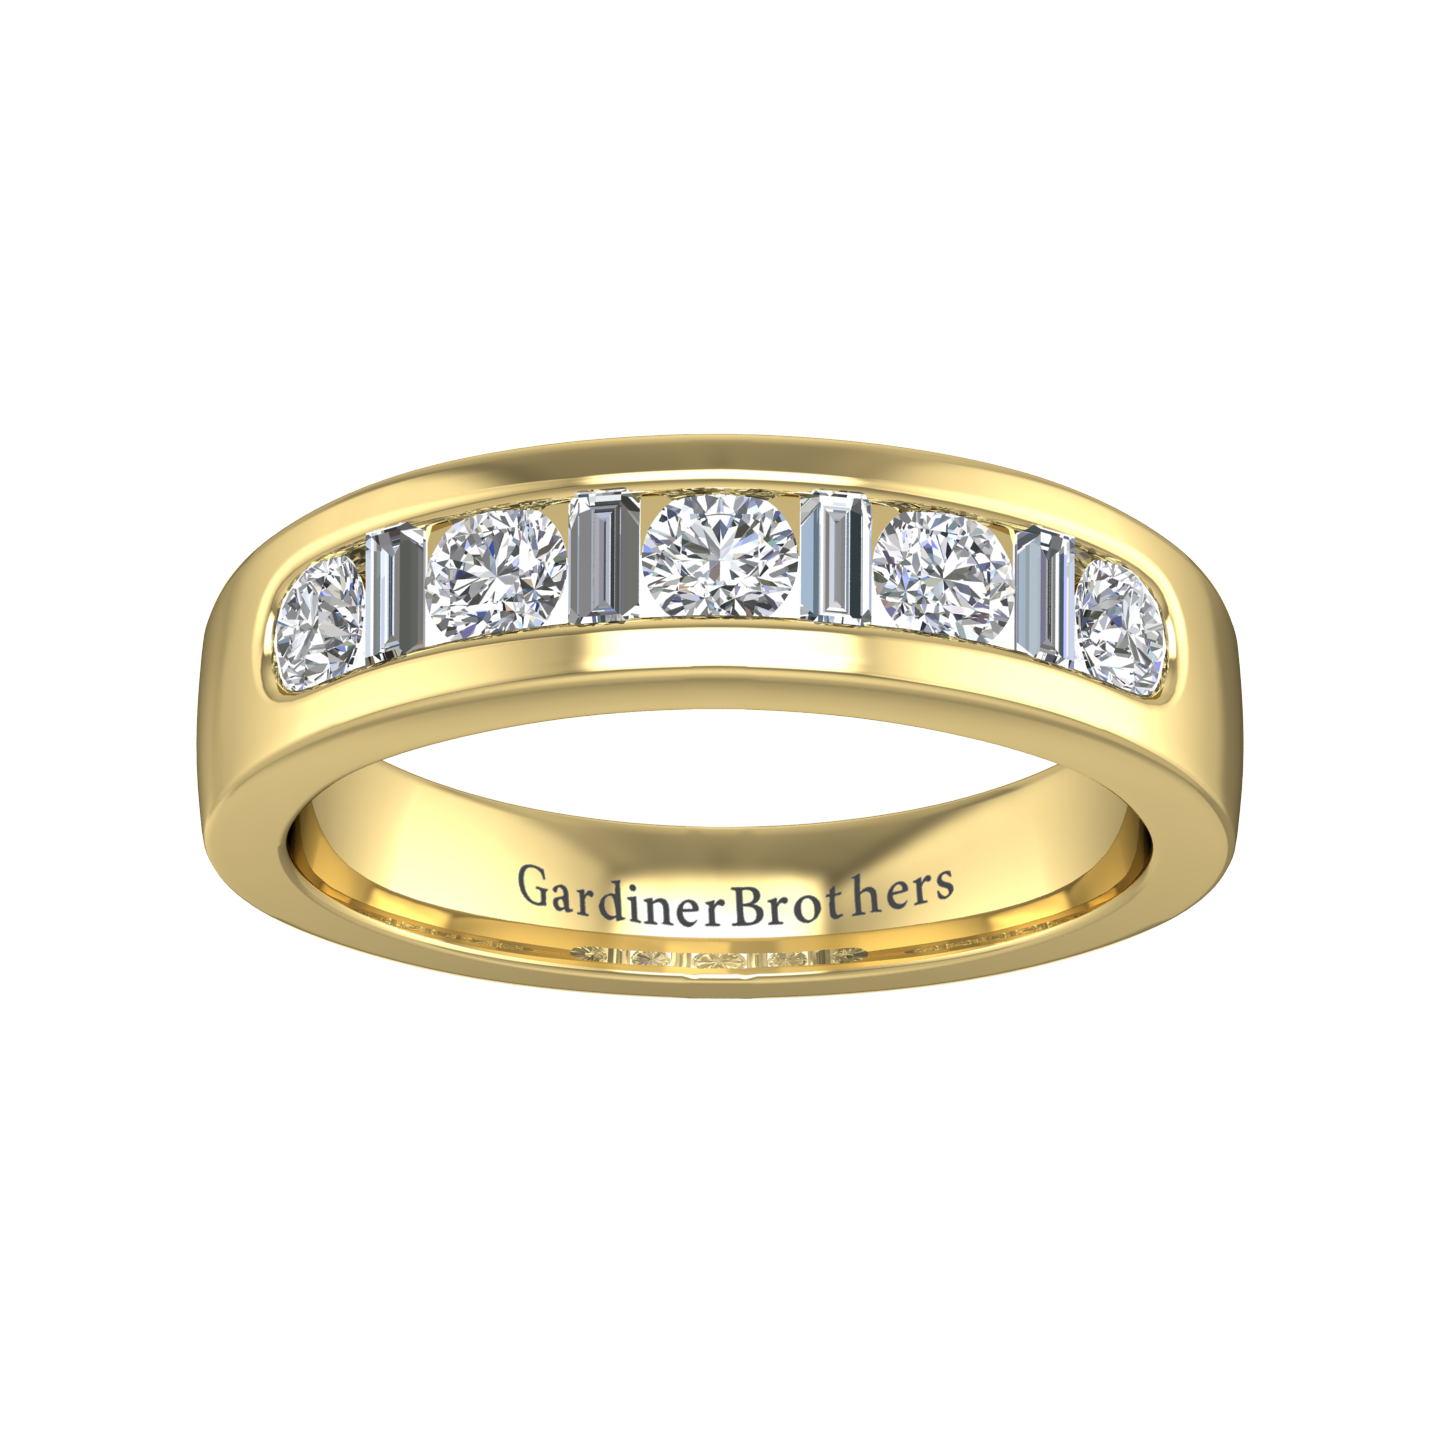 Round Brilliant and Baguette Cut Diamond Wedding Band  gardiner-brothers   